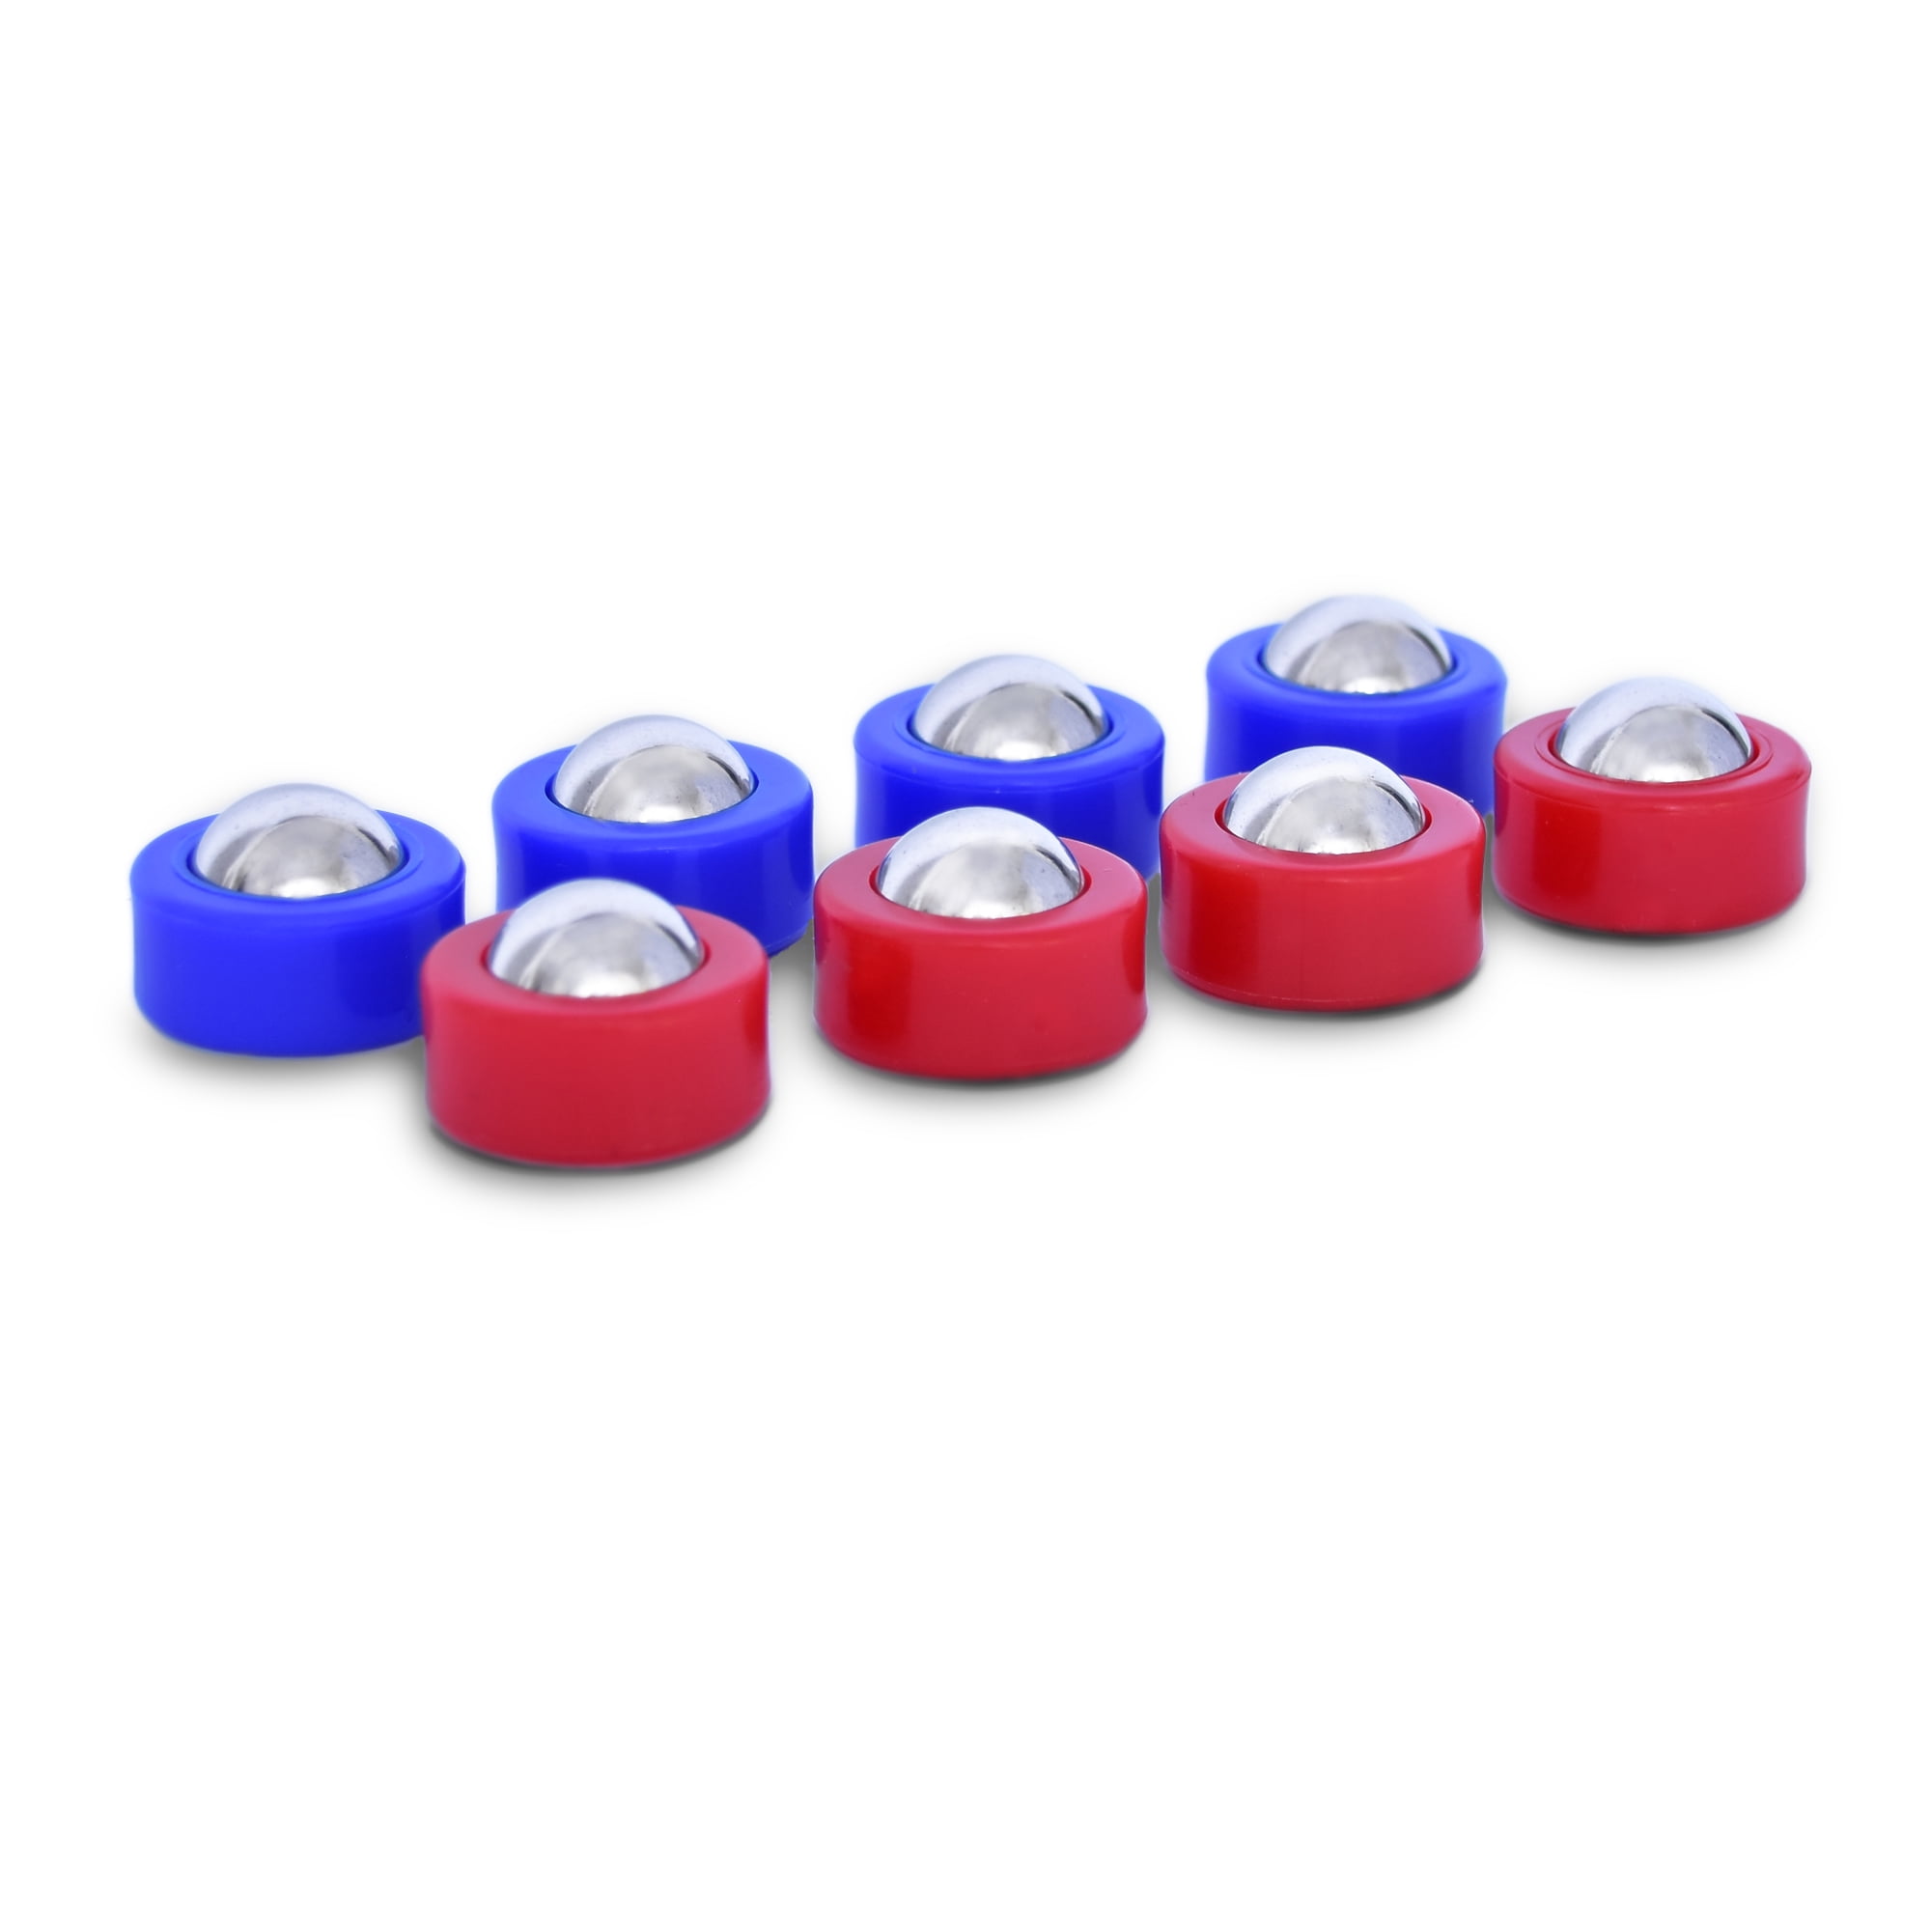 4pcs Red + 4pcs Blue ZRM&E 8pcs Tabletop Curling Game Pucks Replacement Tabletop Equipment Rollers Shuffleboard Curling Accessories for Children and Adults